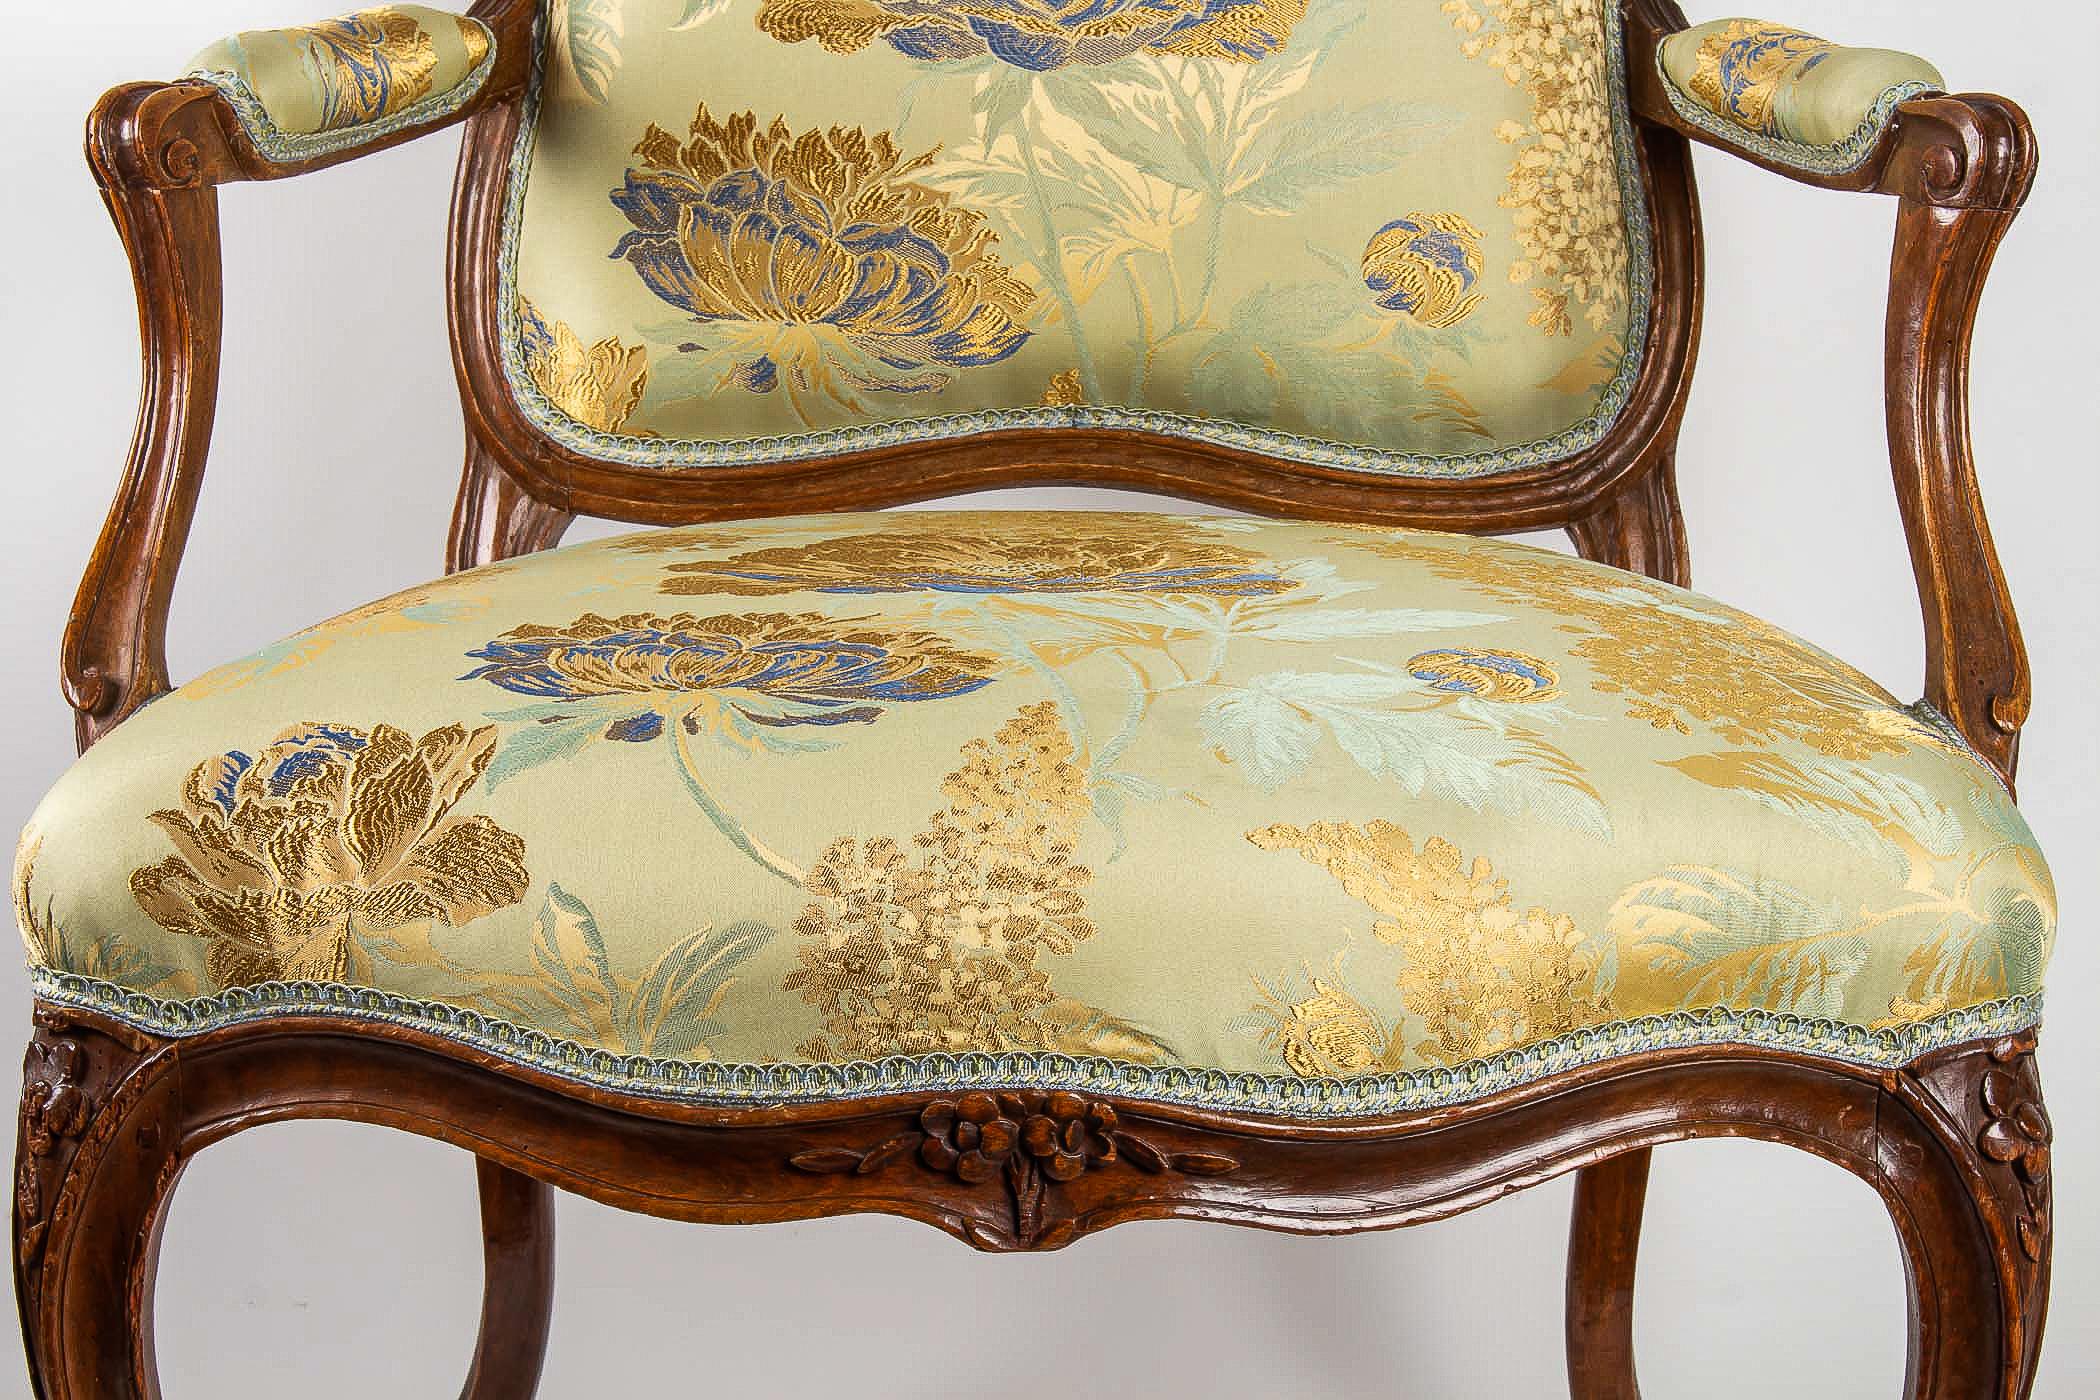 18th Century Louis XV Period Set of 4 of Large Armchairs, circa 1766-1770 by Louis Delanois